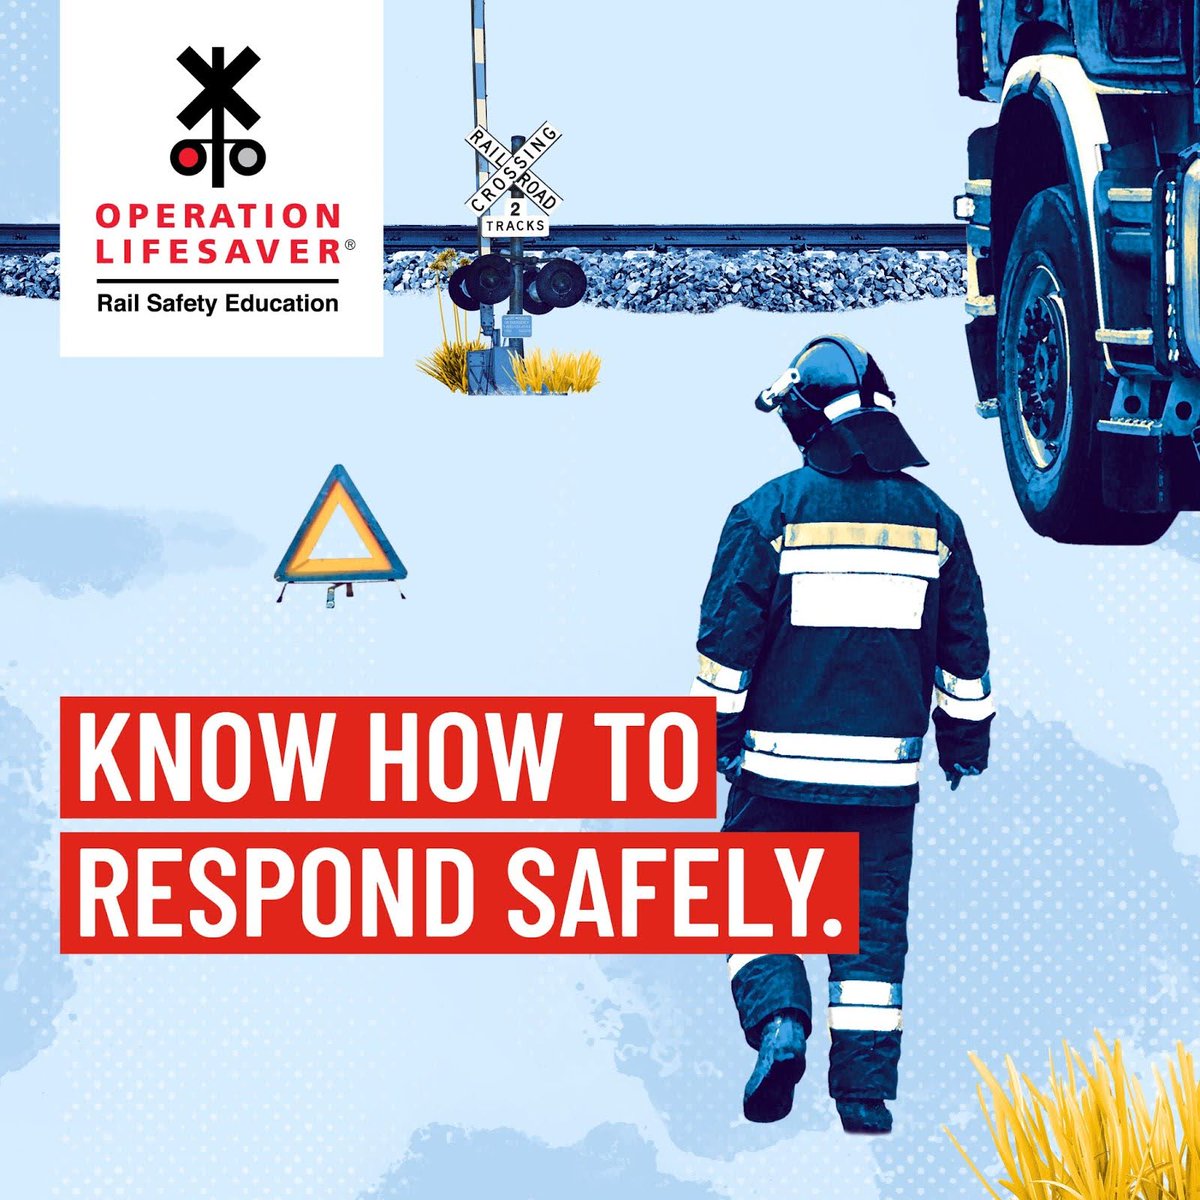 #EmergencyResponders are a critical rail safety partner. Know how to keep yourself safe when responding near railroad tracks and trains. Learn more at bit.ly/4b2rVHq #RailSafetyEducation #NationalEMSWeek